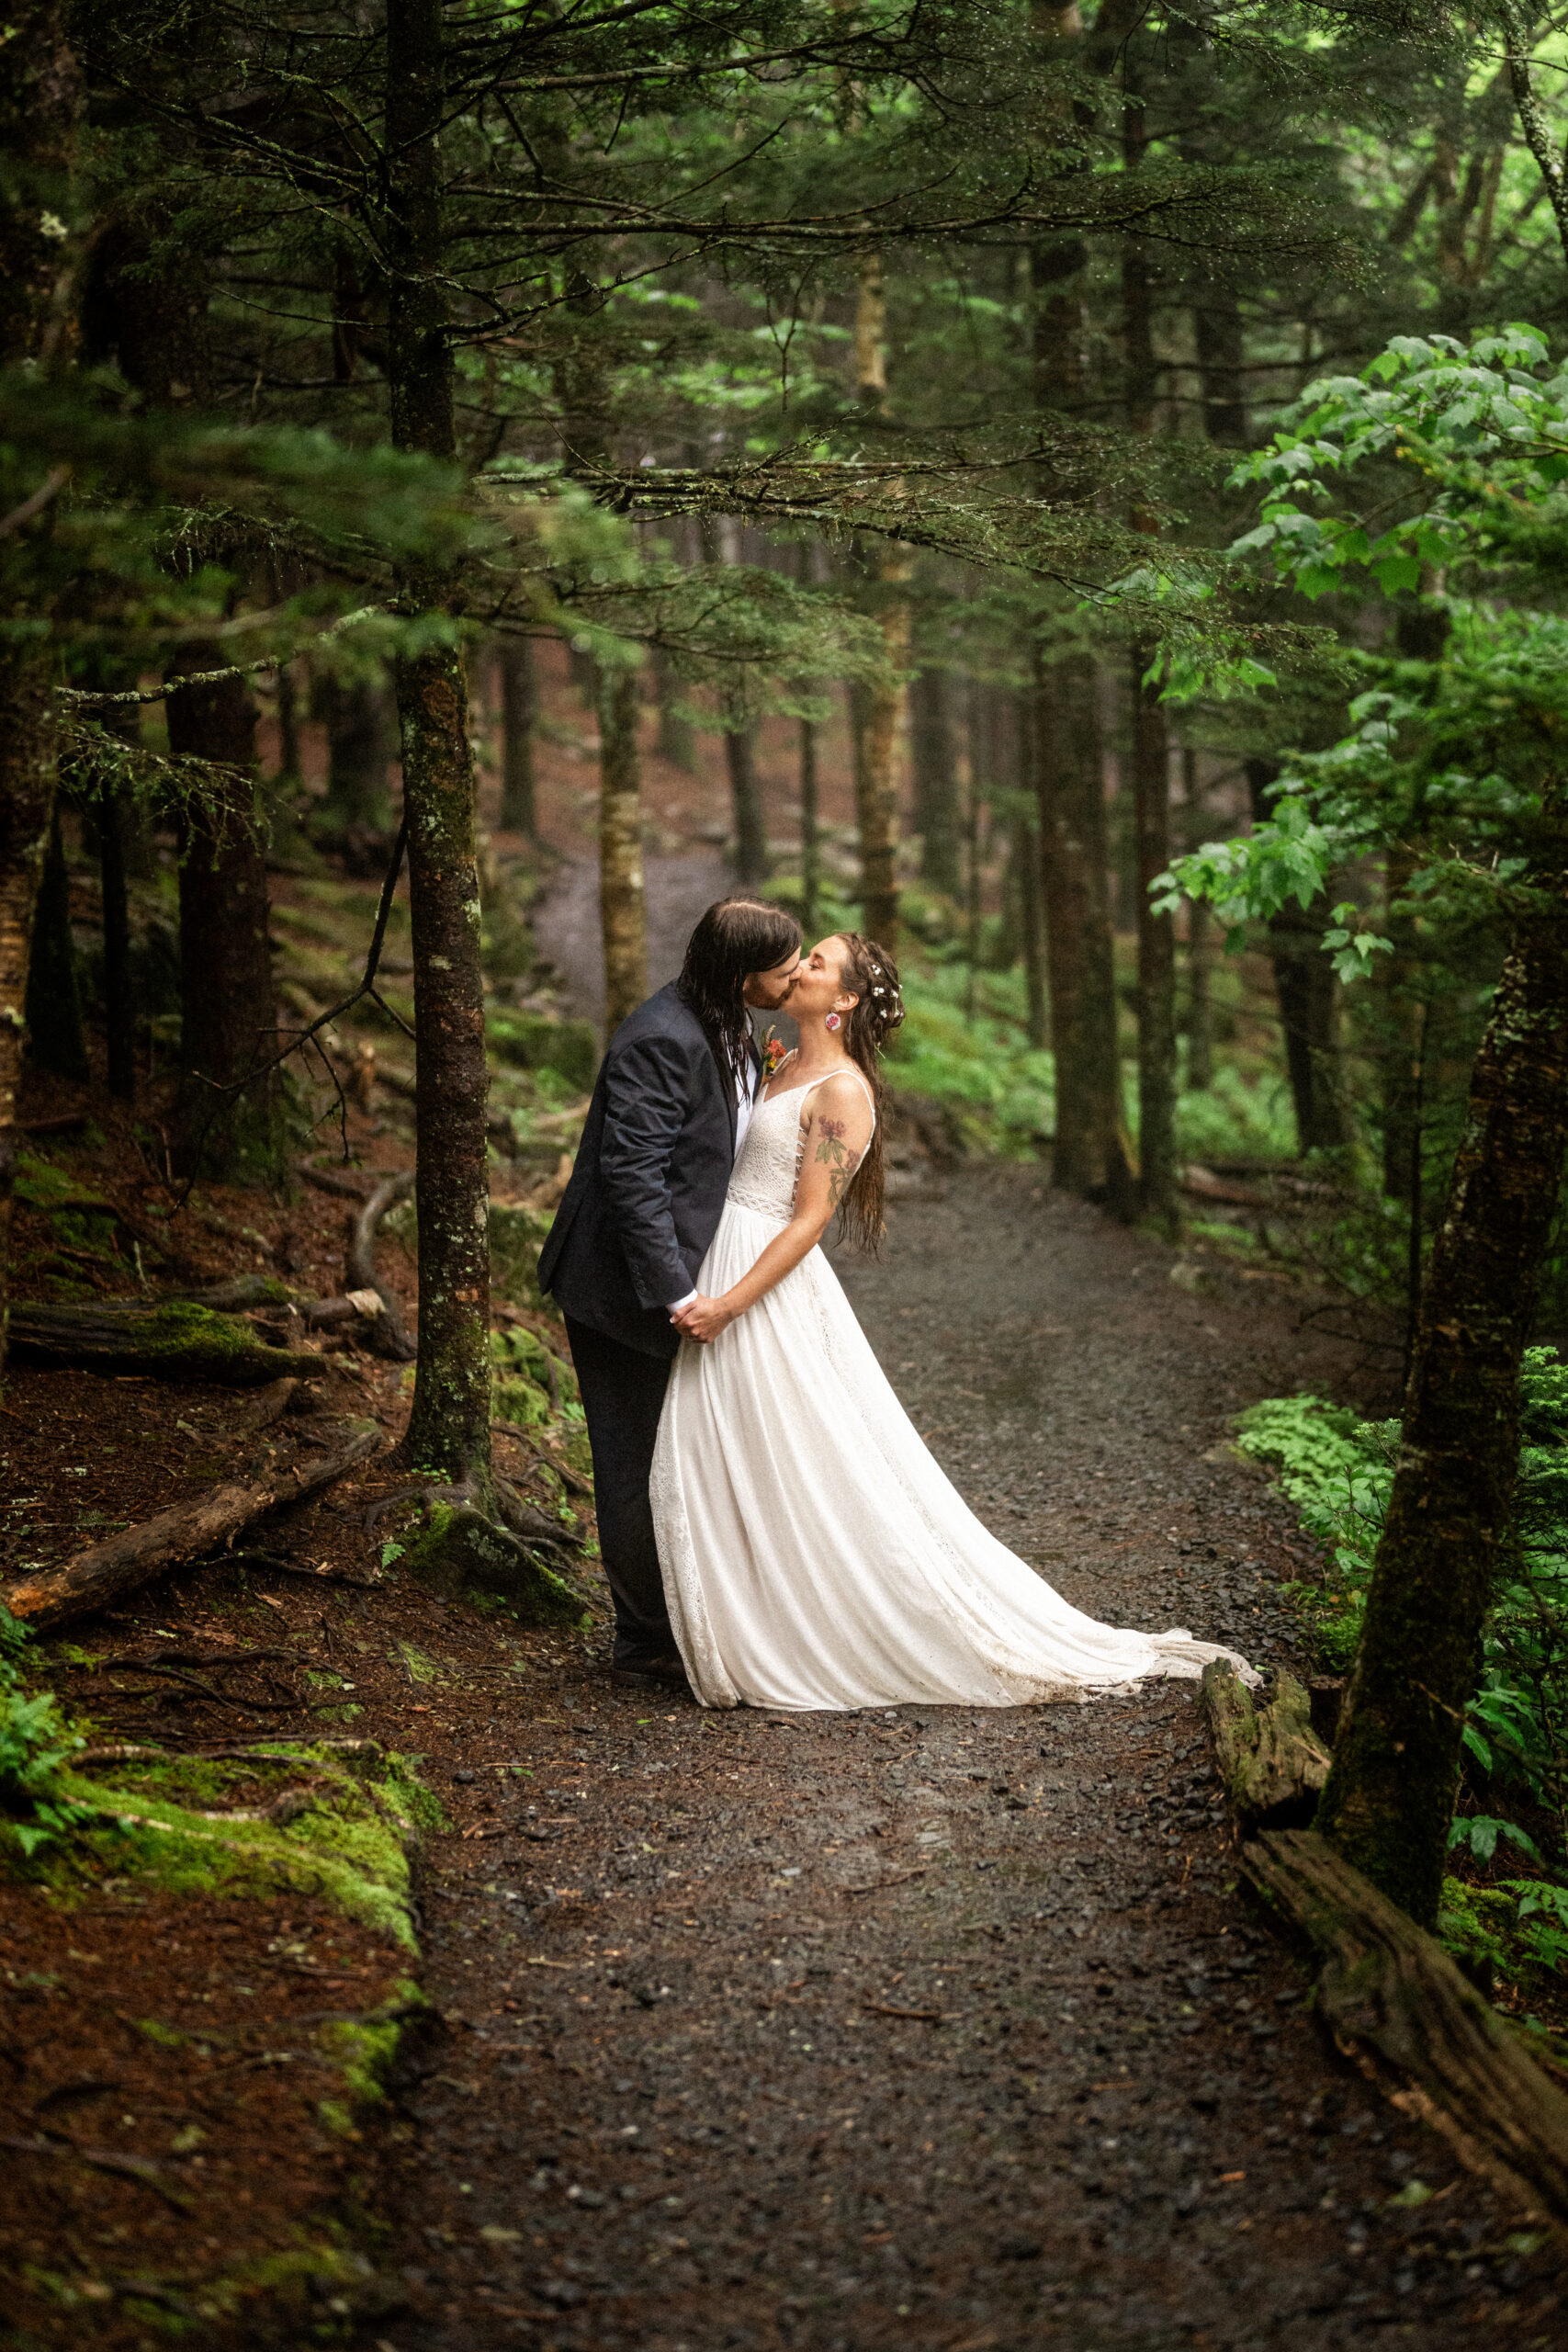 Bride and groom kiss passionately in the forest while rain falls around them